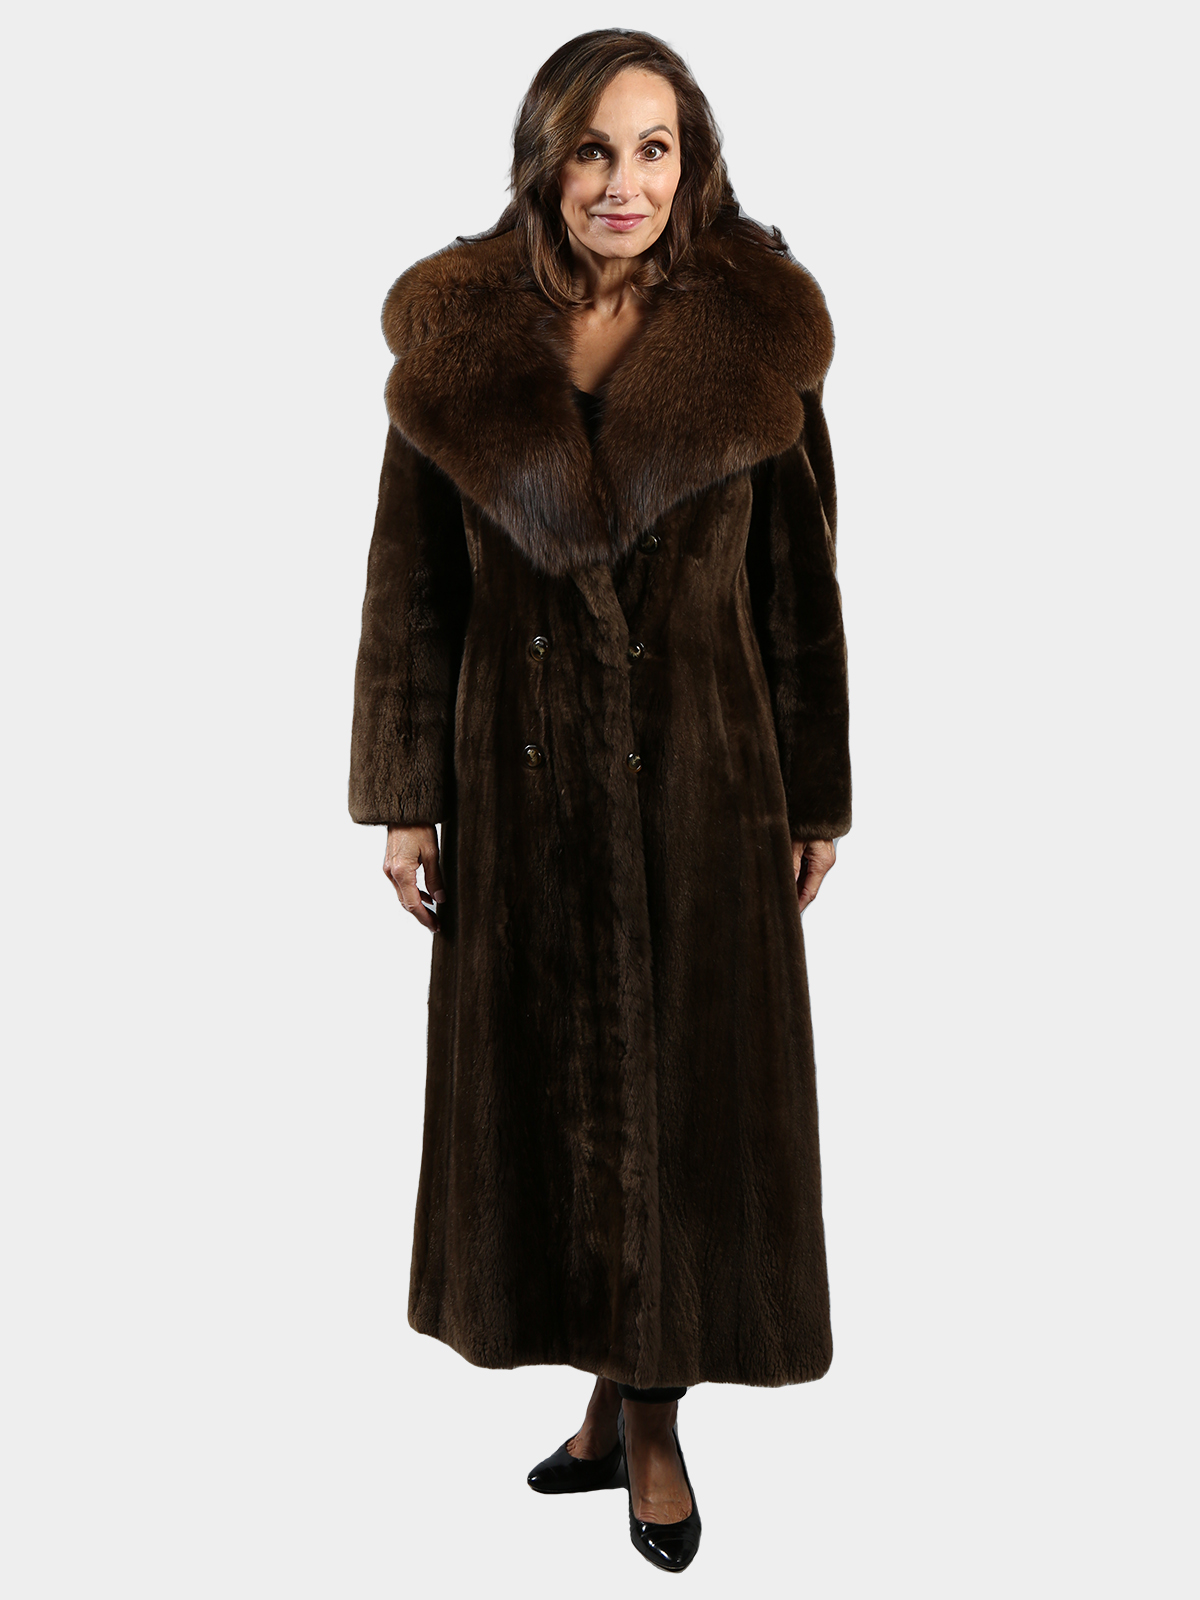 Woman's Vintage Natural Sheared Nutria Coat with Fox Collar - Estate Furs